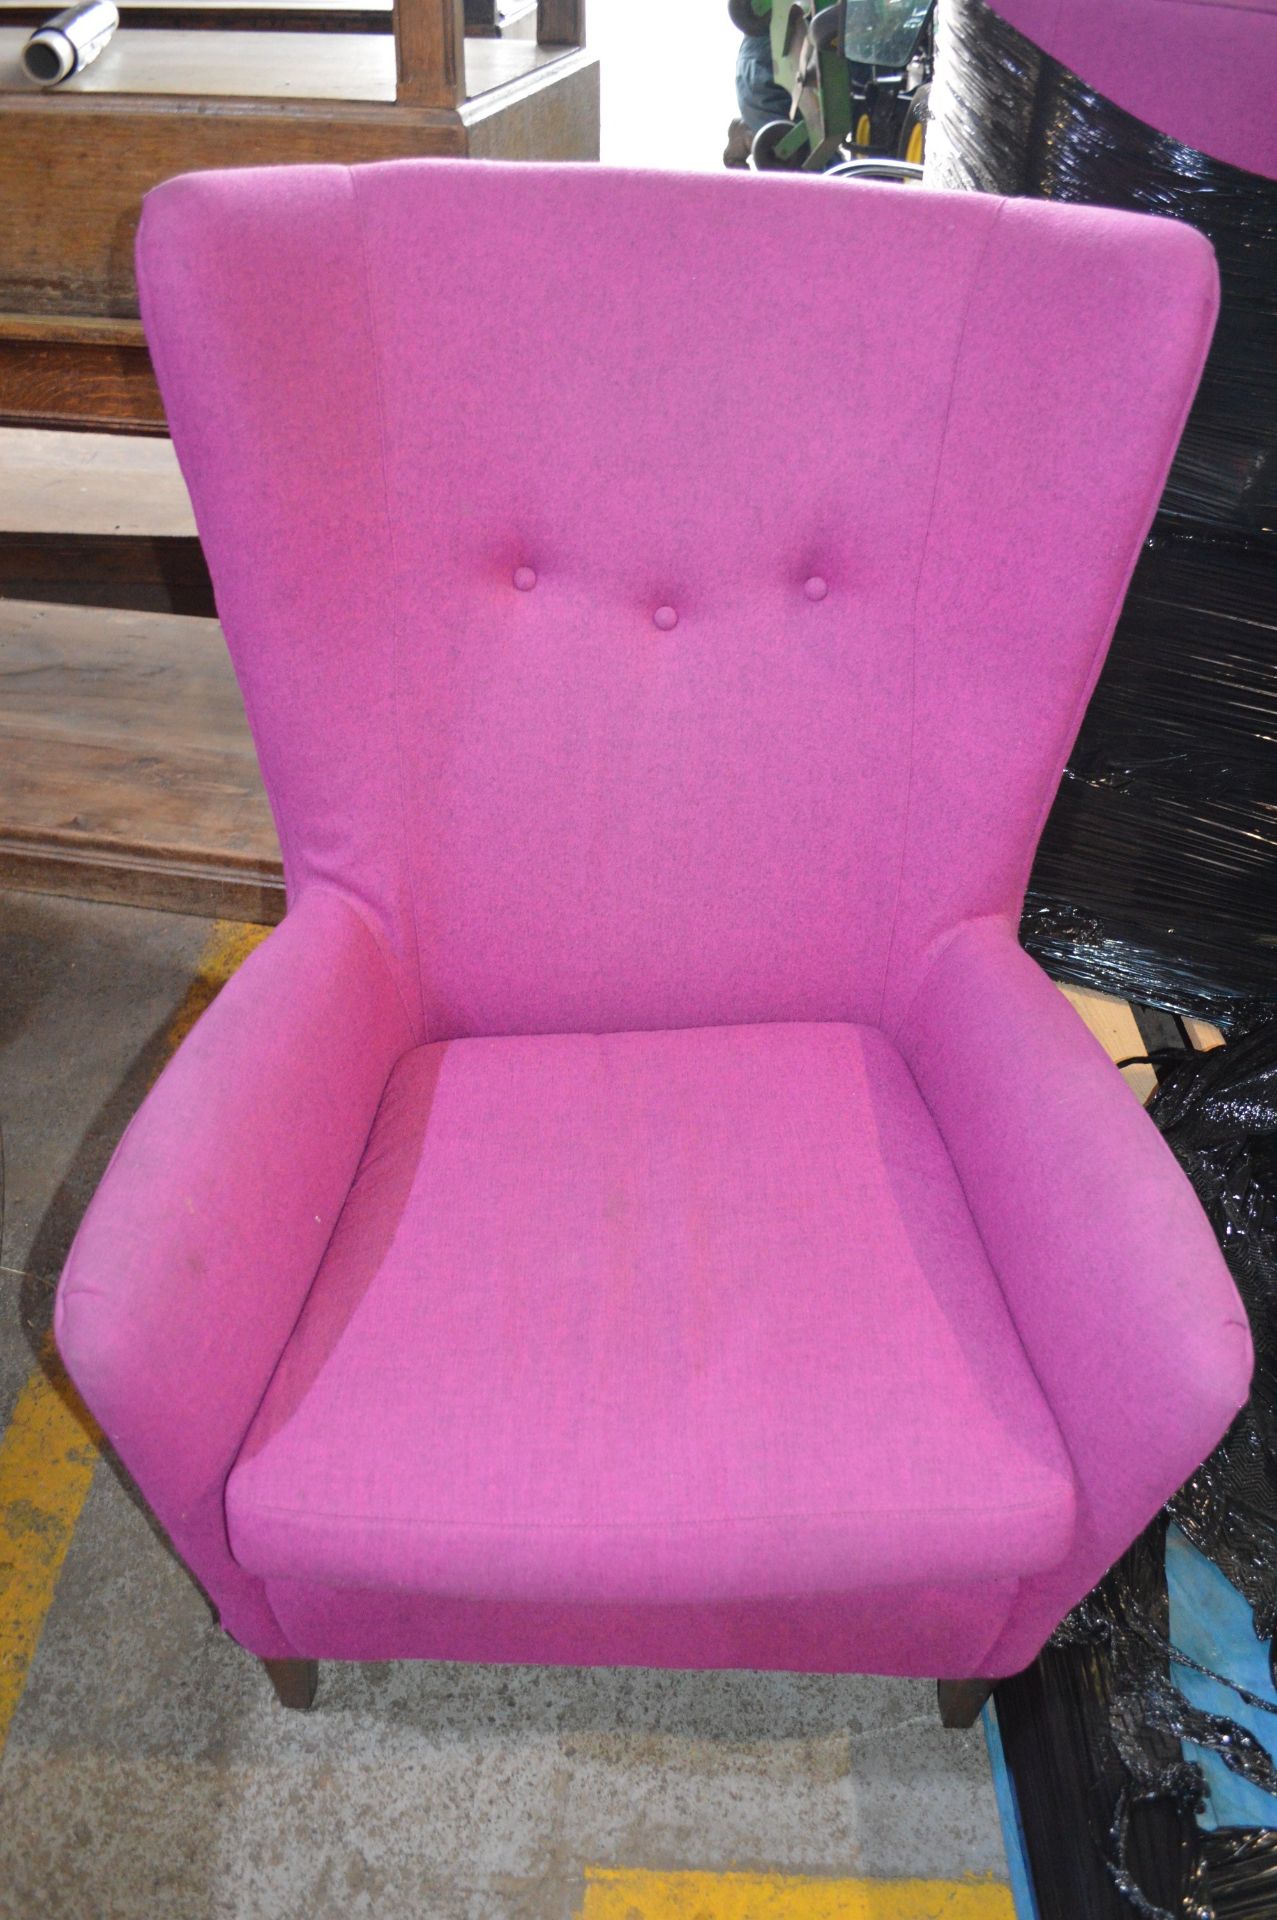 X1 LARGE HIGH BACK BLUE CLOTH CHAIR & X1 LARGE HIGH BACK PINK CLOTH CHAIR *NO VAT* - Image 5 of 8